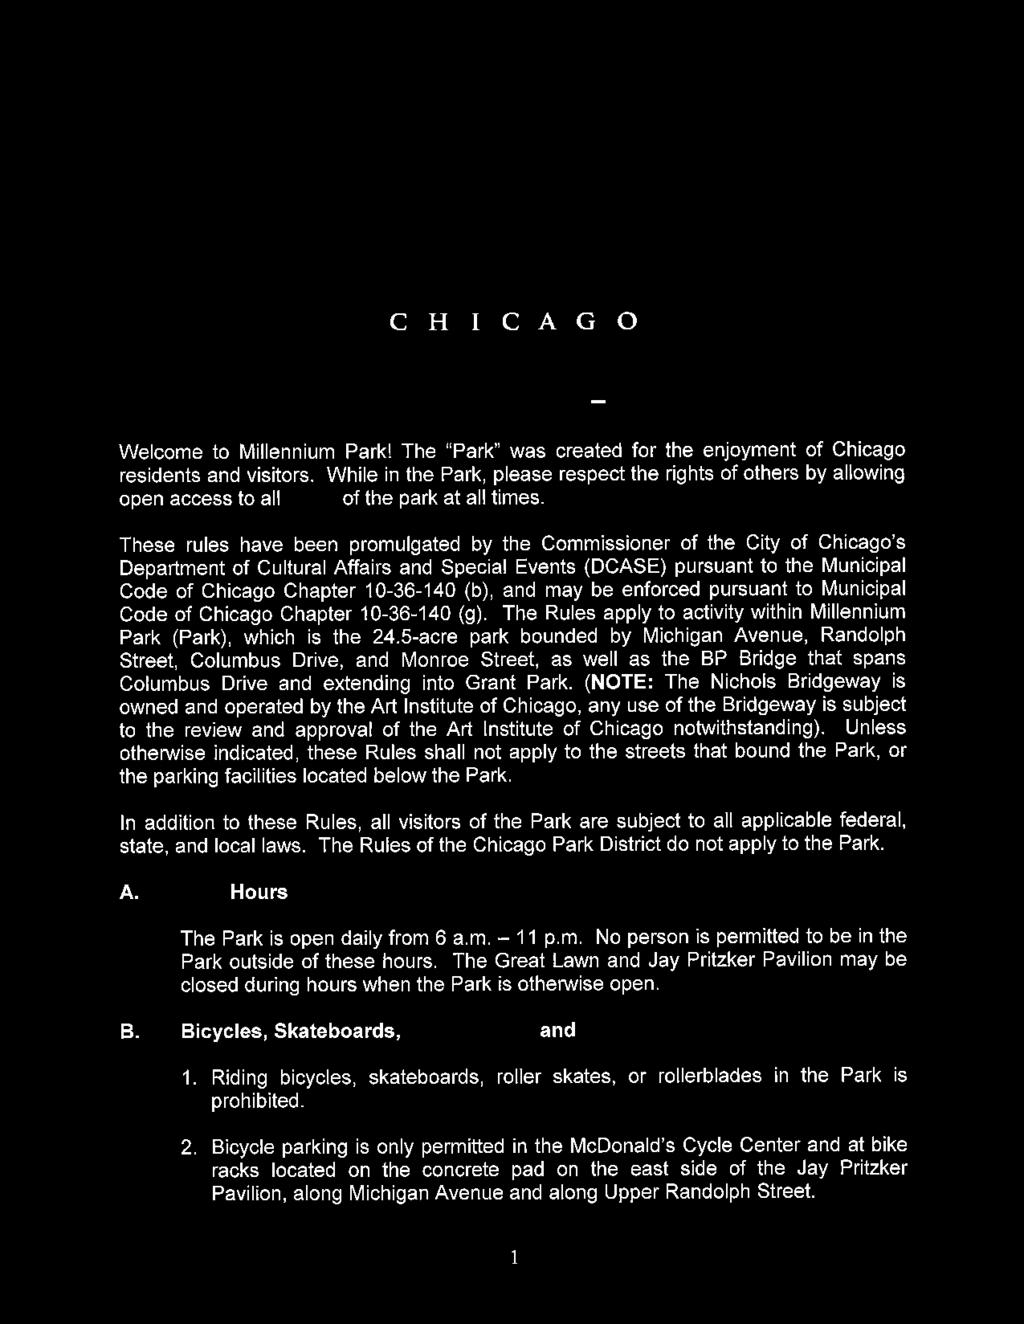 These rules have been promulgated by the Commissioner of the City of Chicago's Department of Cultural Affairs and Special Events (DCASE) pursuant to the Municipal Code of Chicago Chapter 10-36-140